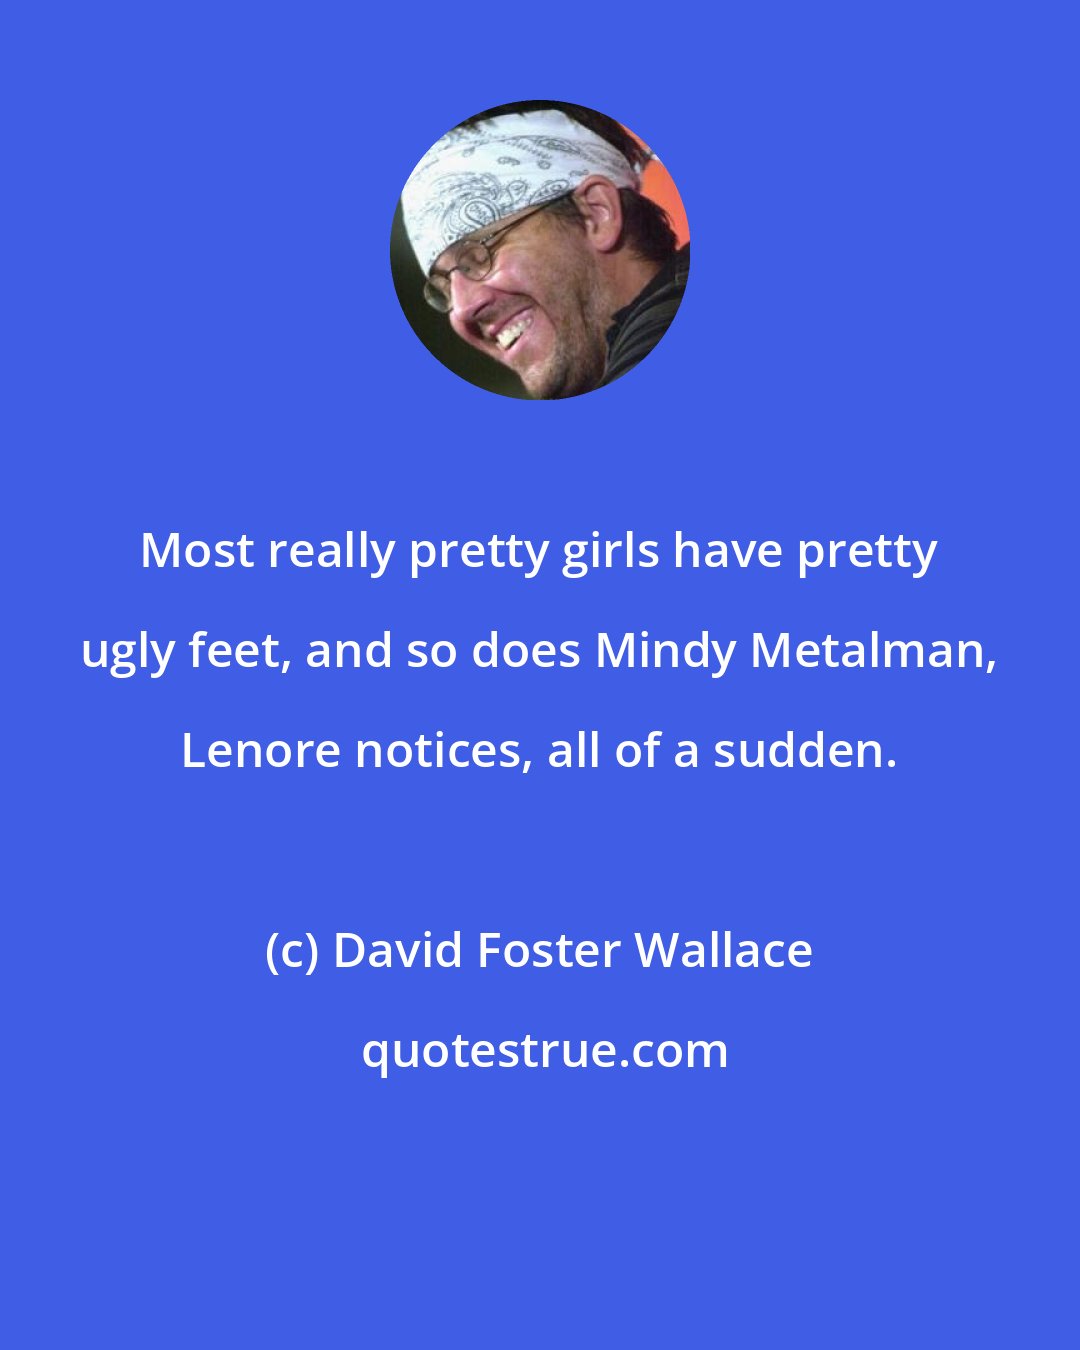 David Foster Wallace: Most really pretty girls have pretty ugly feet, and so does Mindy Metalman, Lenore notices, all of a sudden.